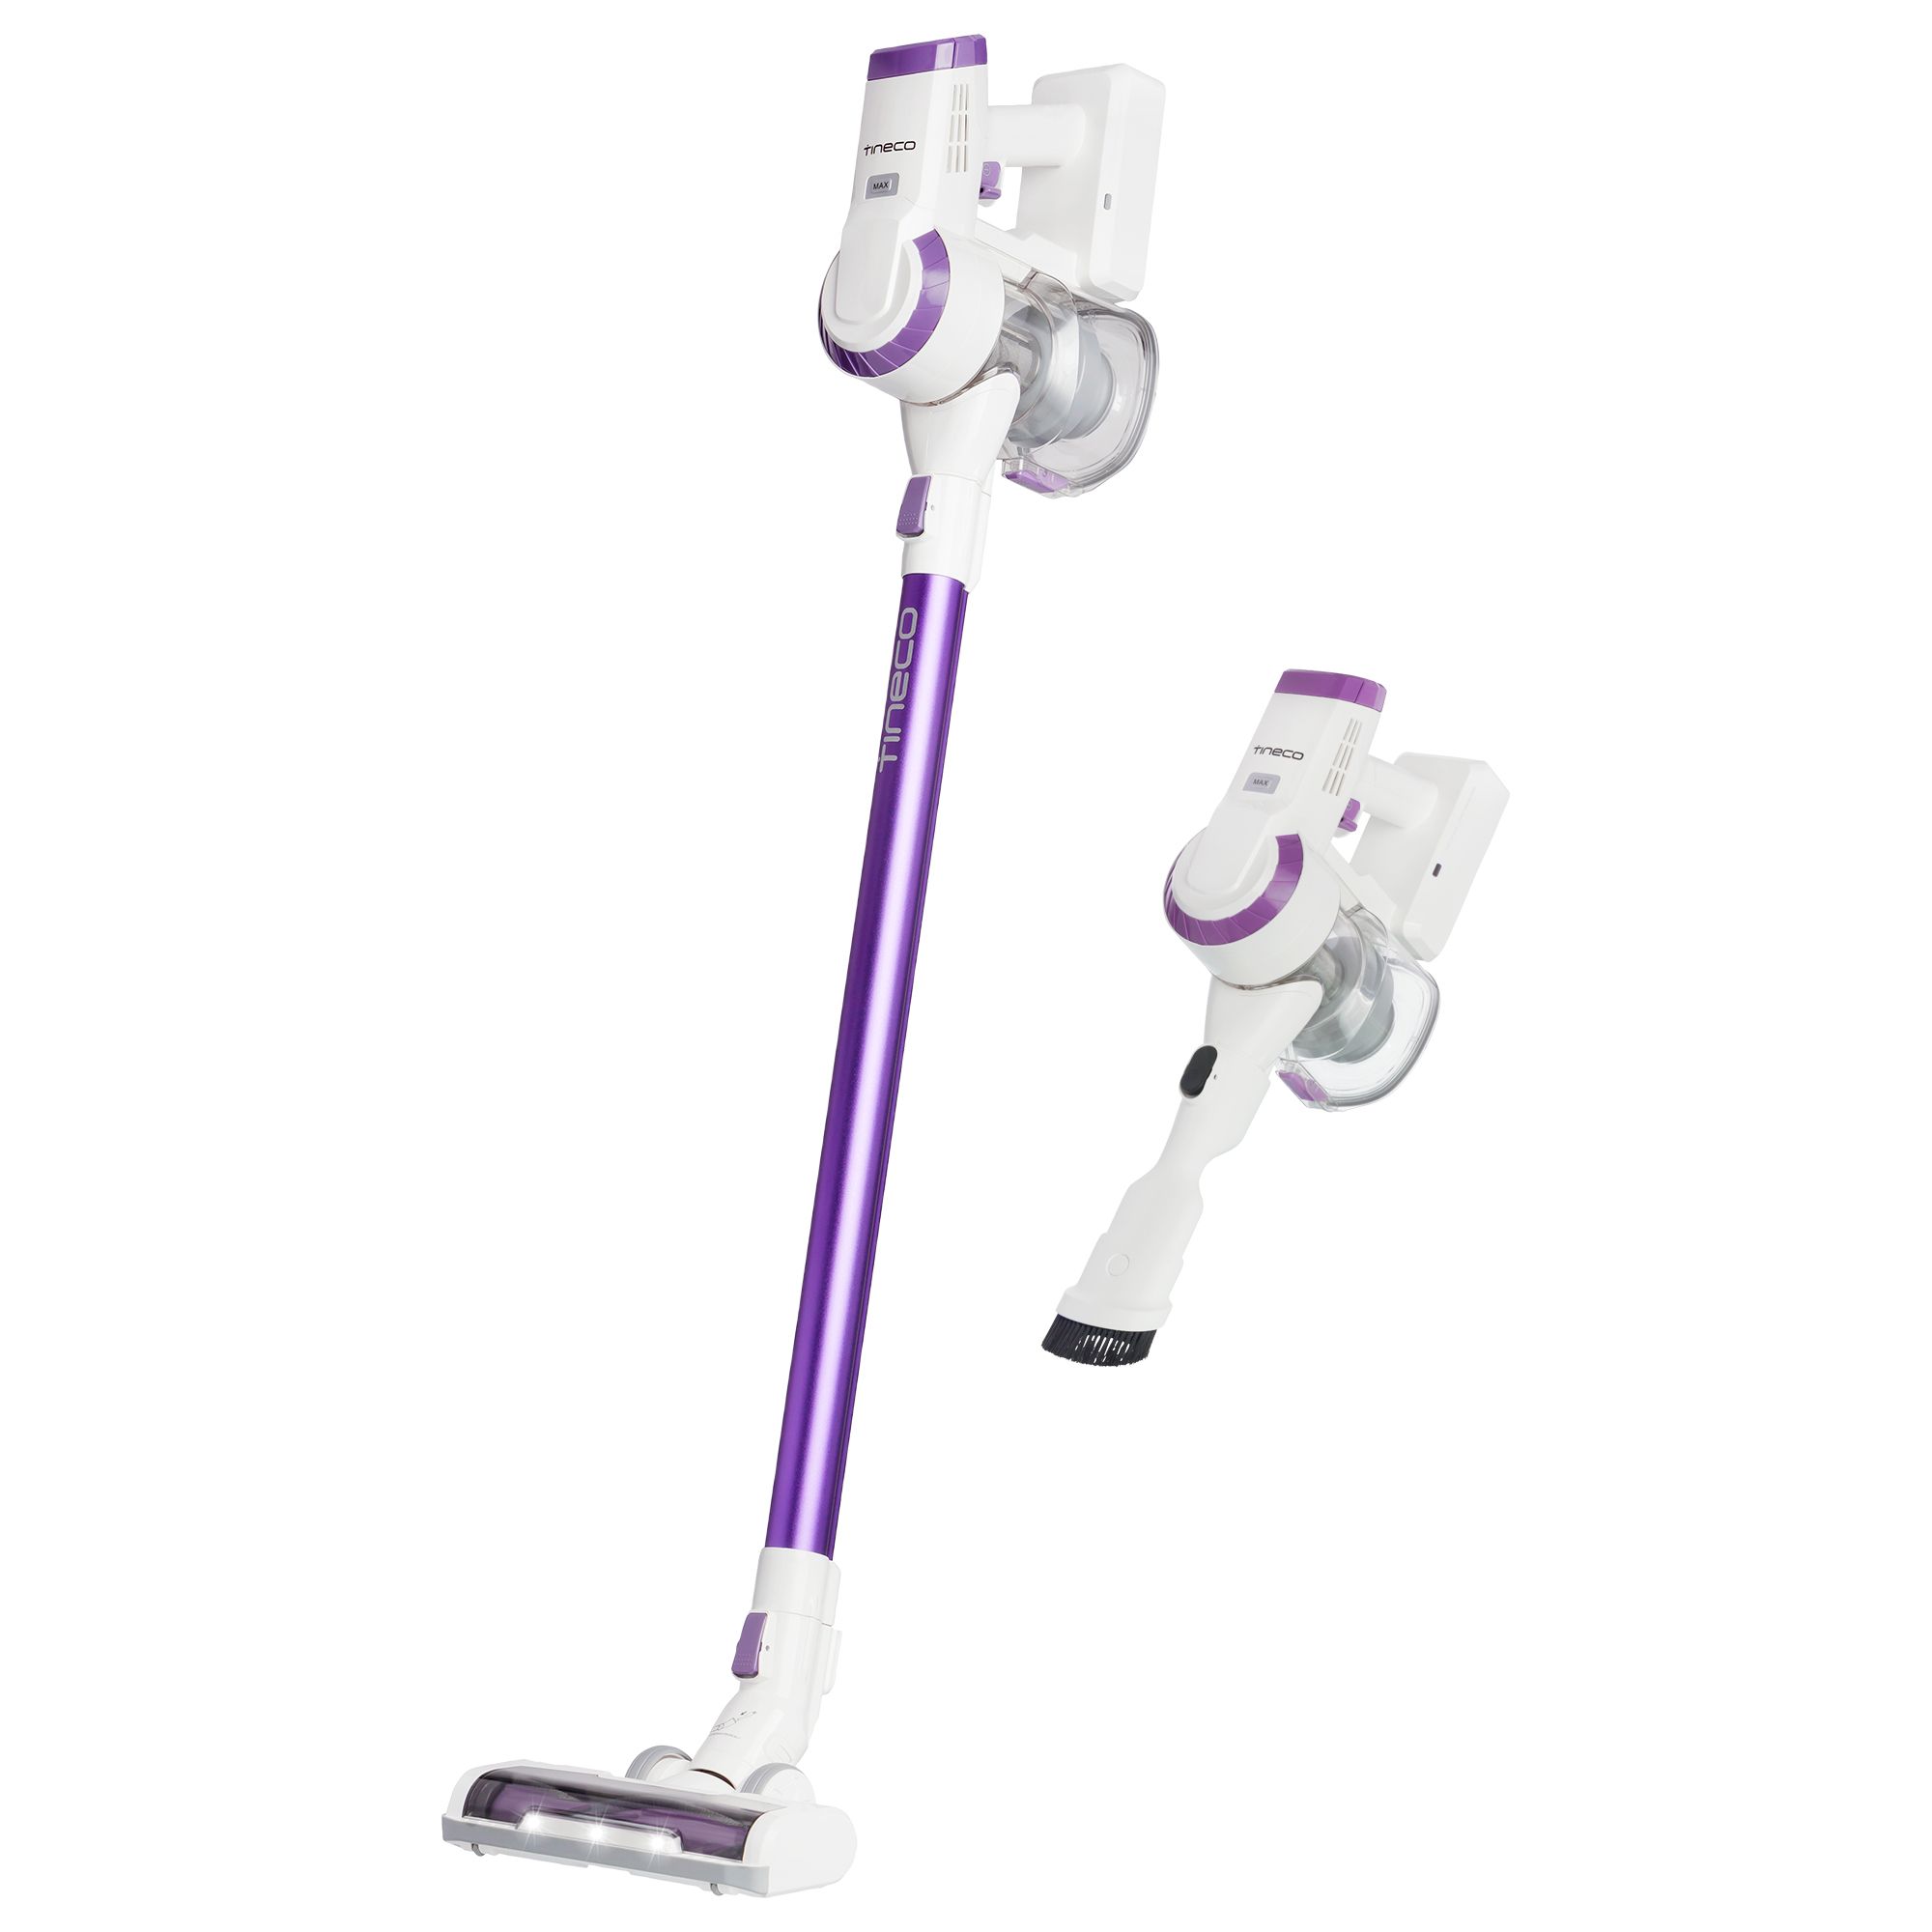 Tineco A10-D Lightweight Cordless Stick Vacuum Cleaner for Hardwood Floors & Low-Pile Rugs - image 1 of 8